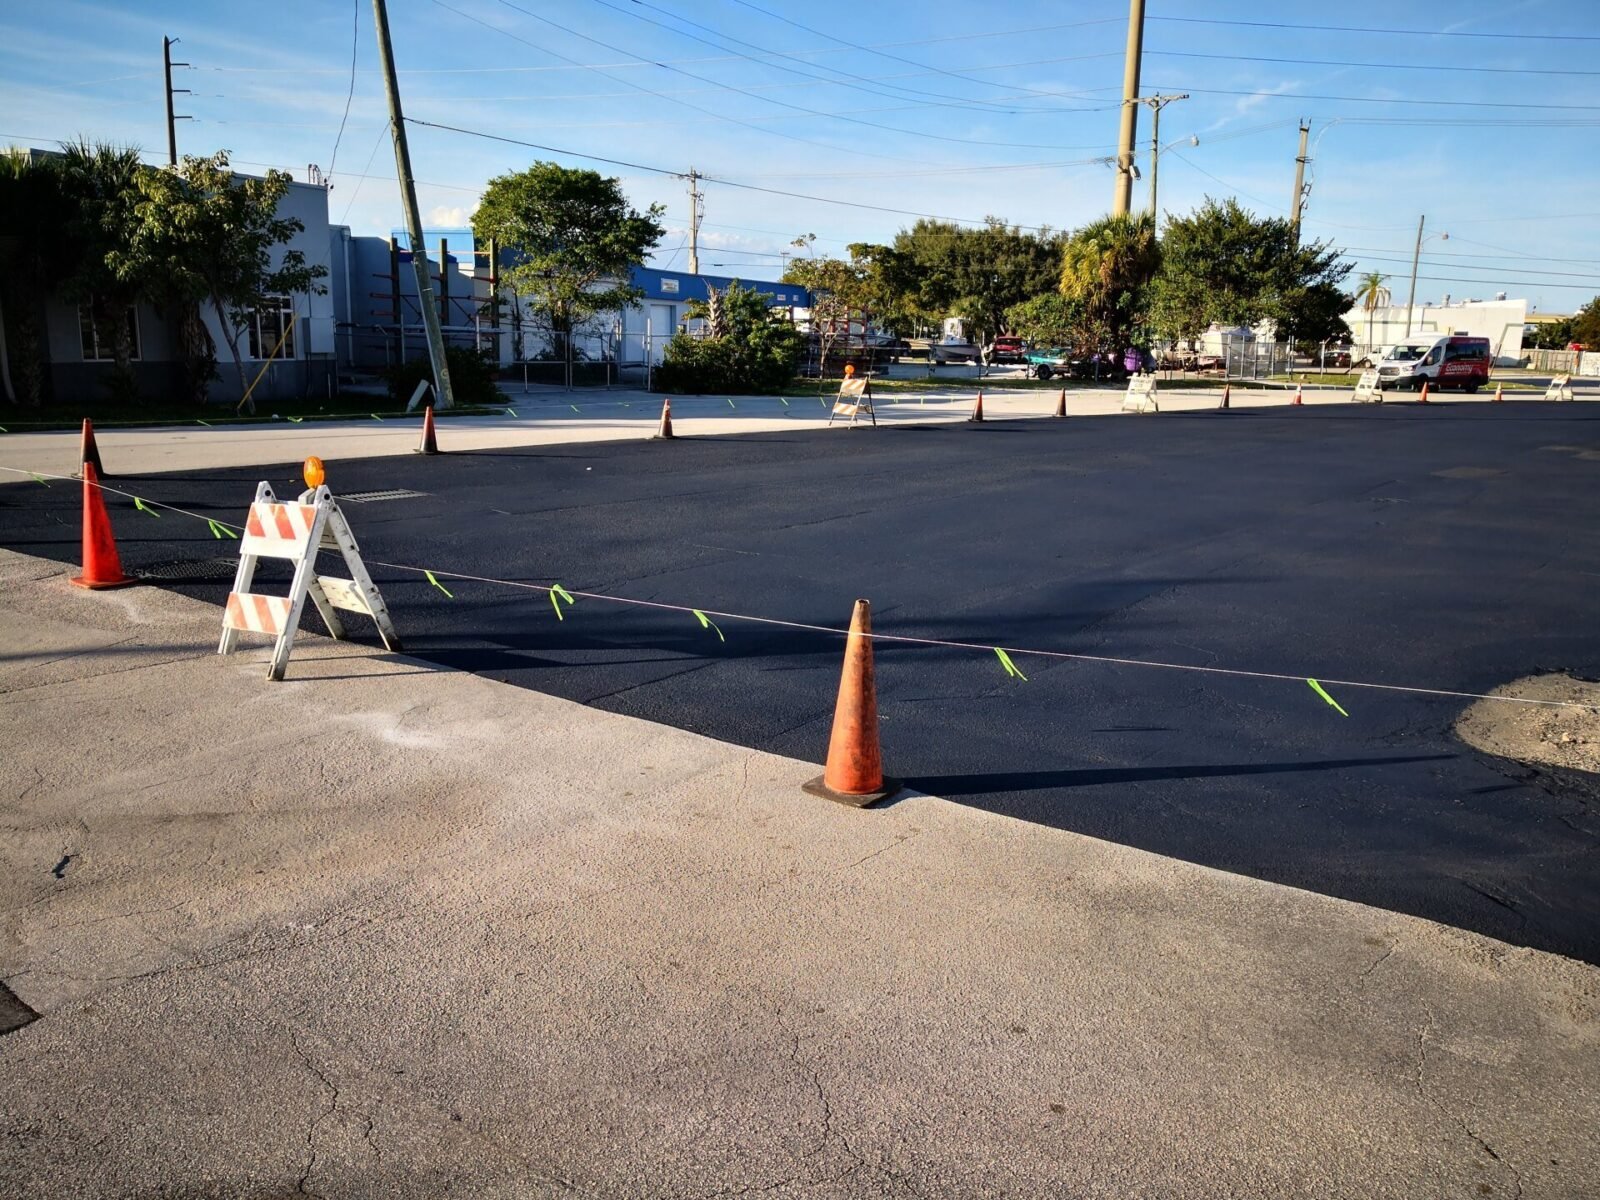 A newly paved black asphalt area is cordoned off with traffic cones and caution tape. There is a white barricade with orange stripes on the left, indicating recent asphalt paving by Palm Beach Asphalt. Vehicles and buildings are visible in the background on a sunny Riviera Beach day.